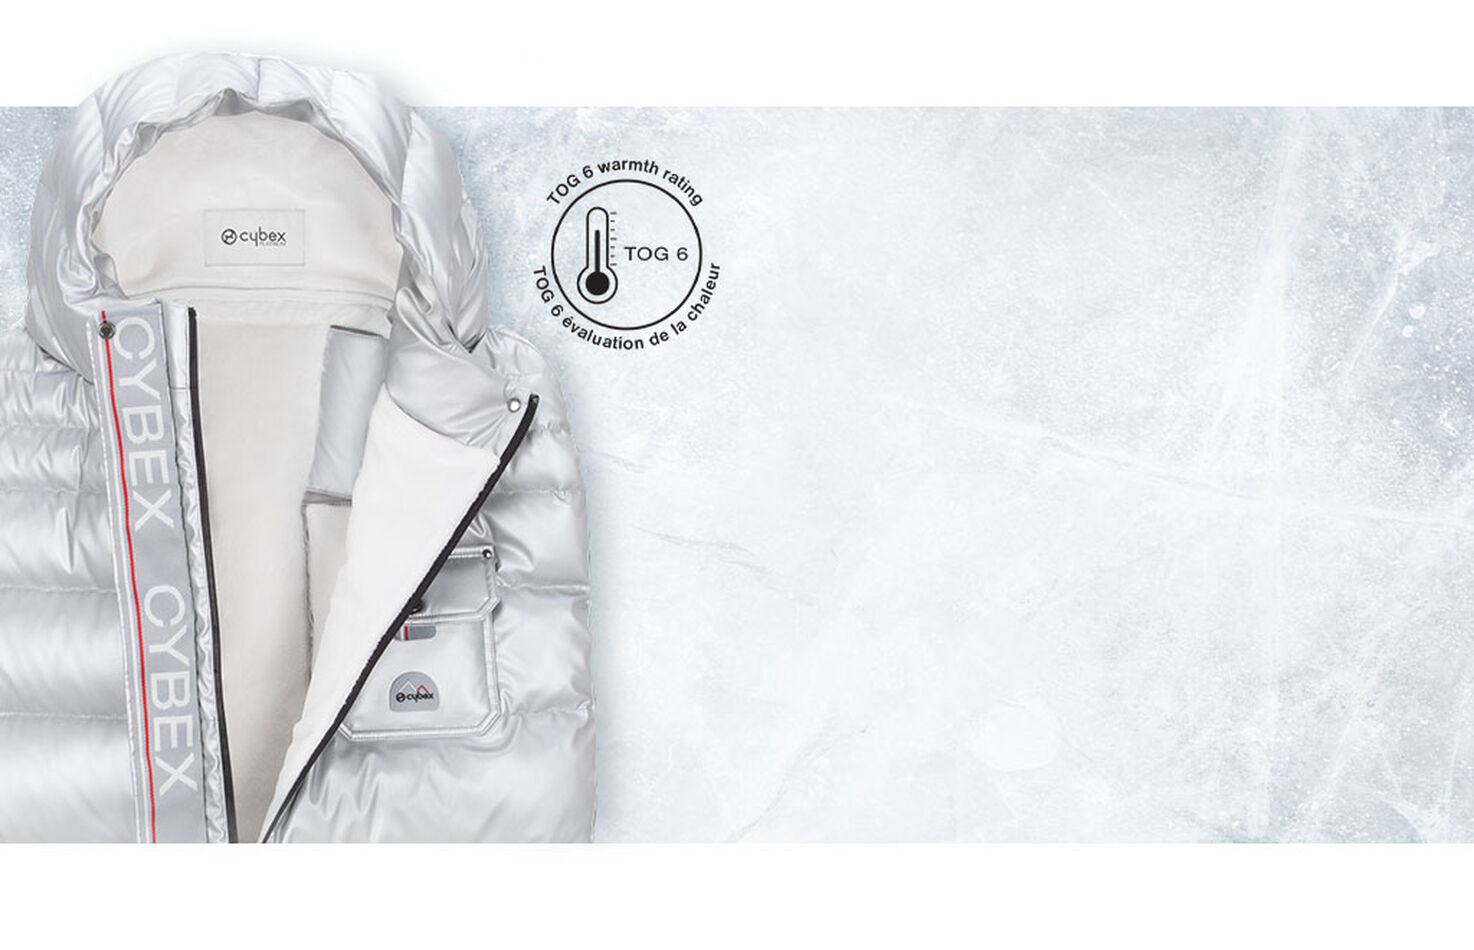 CYBEX Platinum Winter Footmuff Protects From Low Temperatures